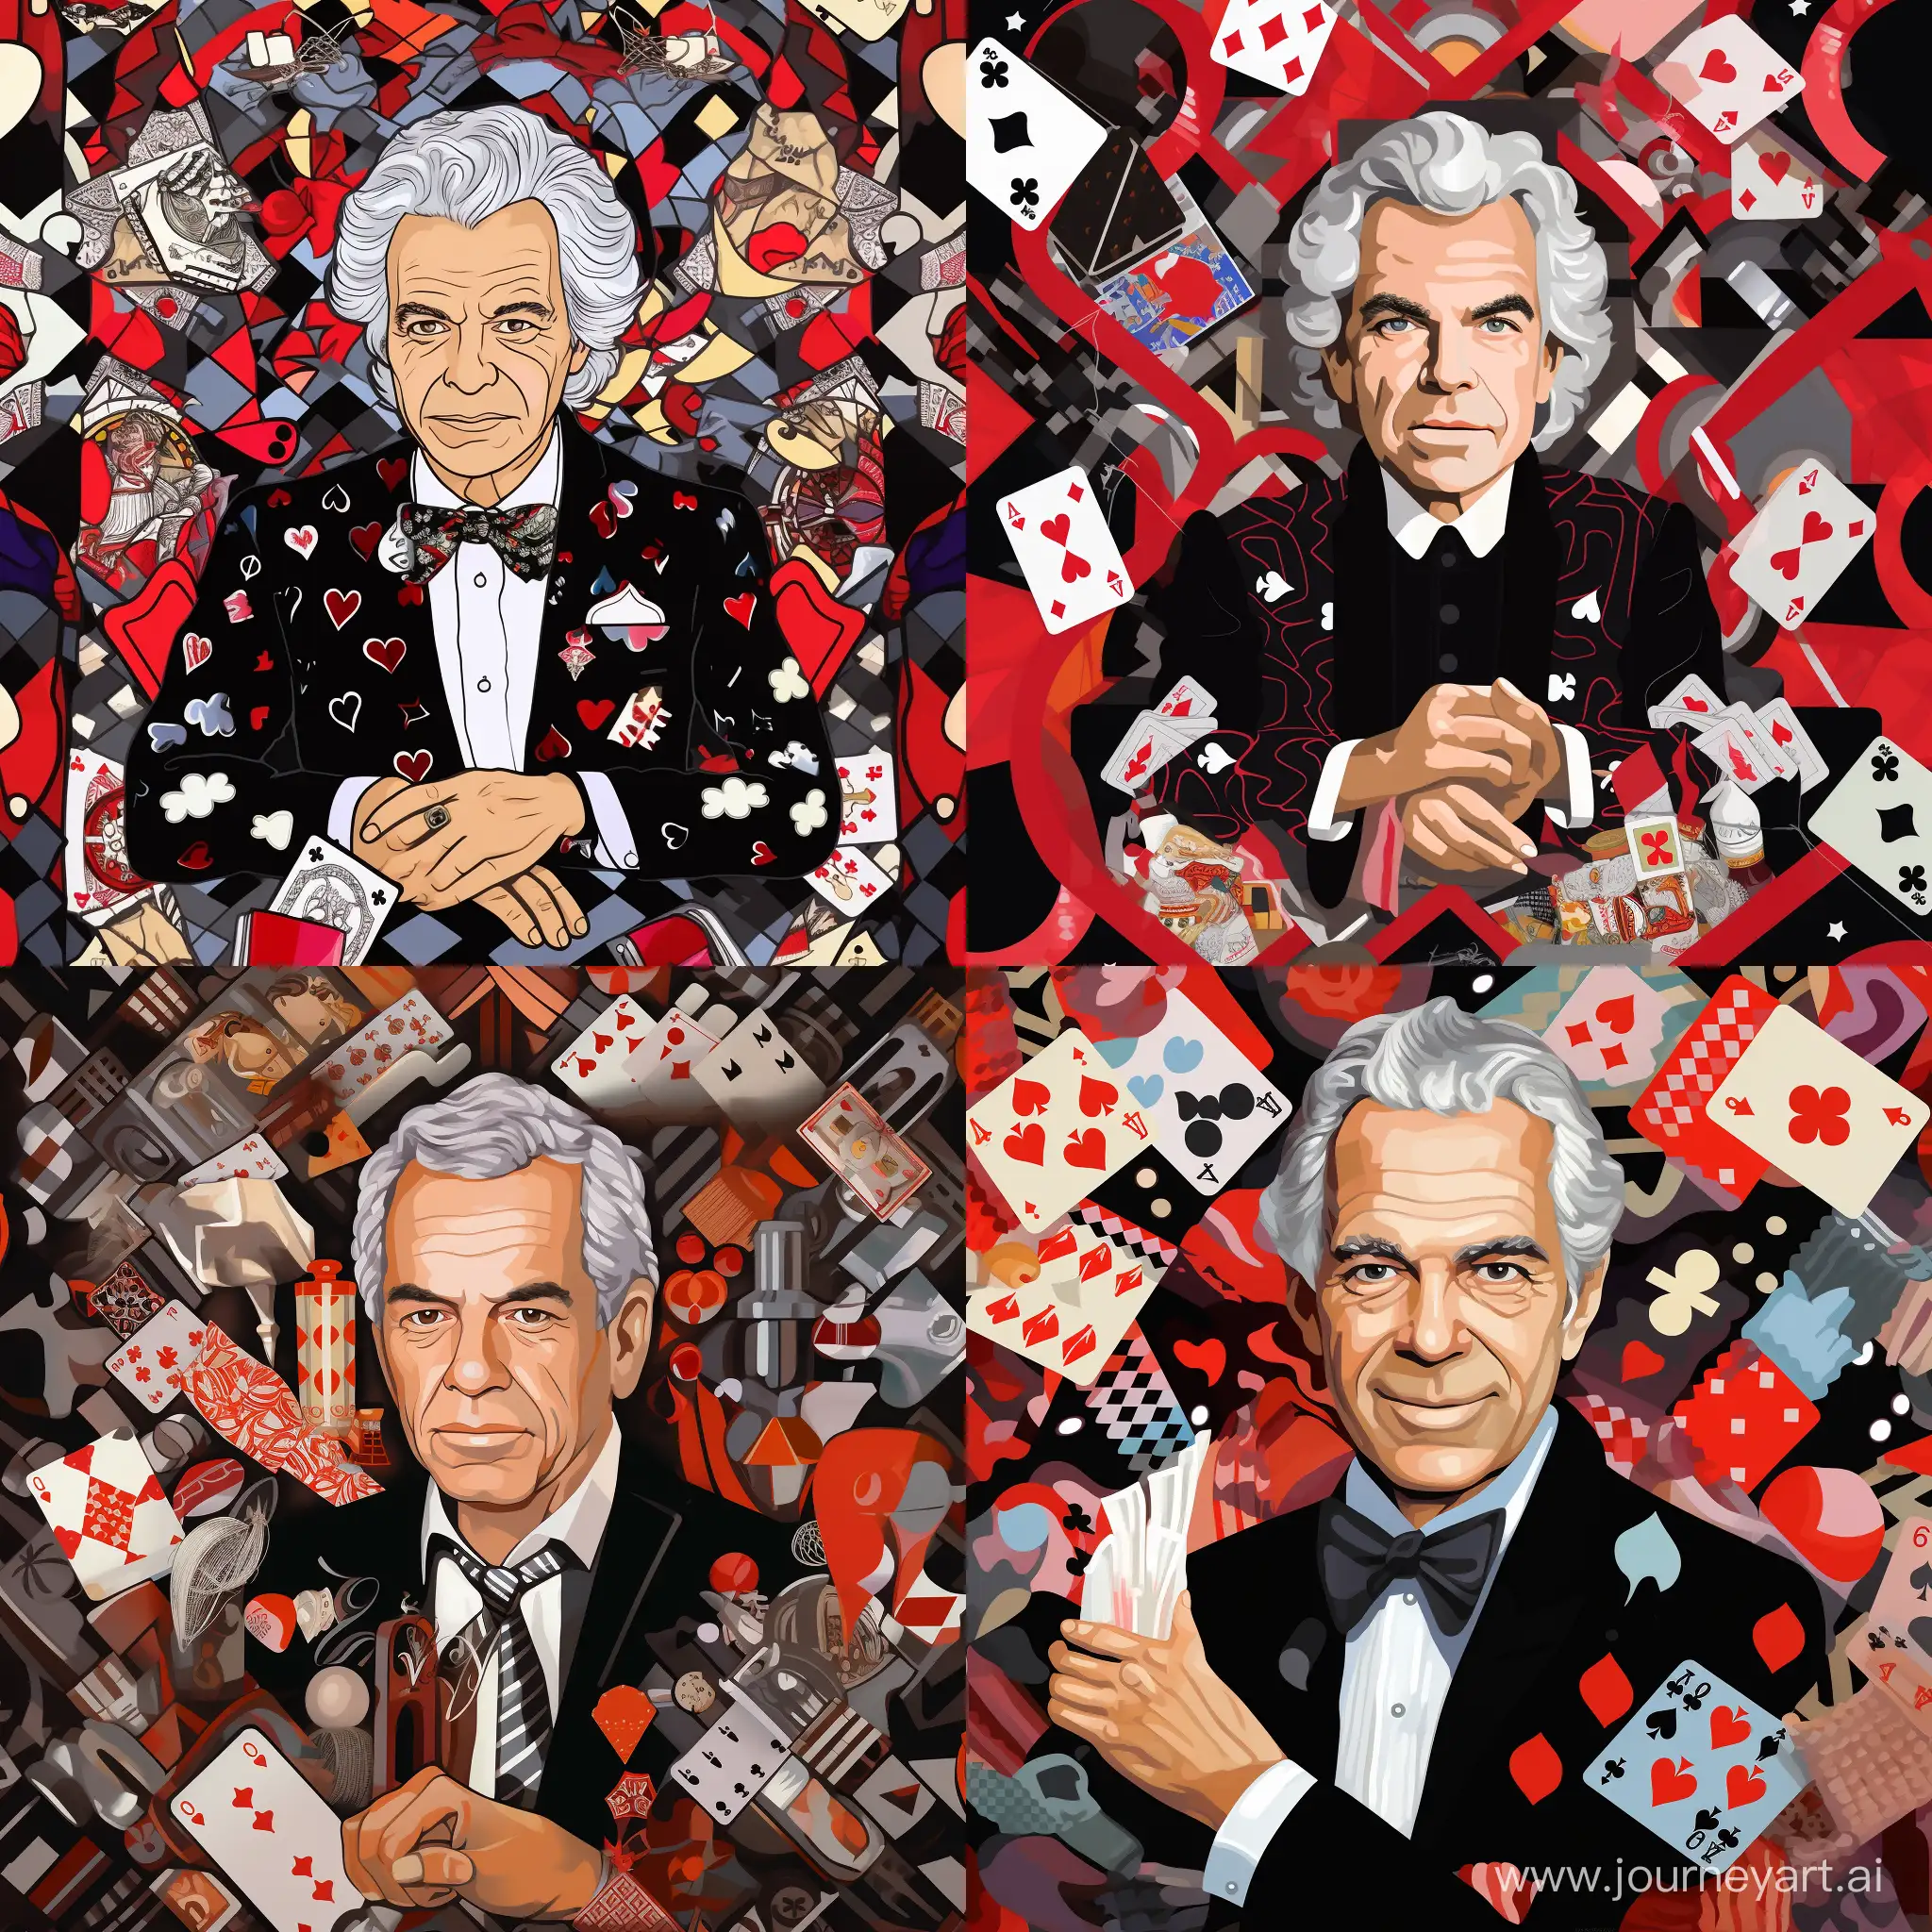 Portrait of Ralph Lauren, with accessories from Ralph Lauren, with a small crown on his head, many details, complex, against the background of a pattern of diamonds, hearts, clubs, spades. colors black, white, red, gray, cartoon style, pop art style, fashion illustration style